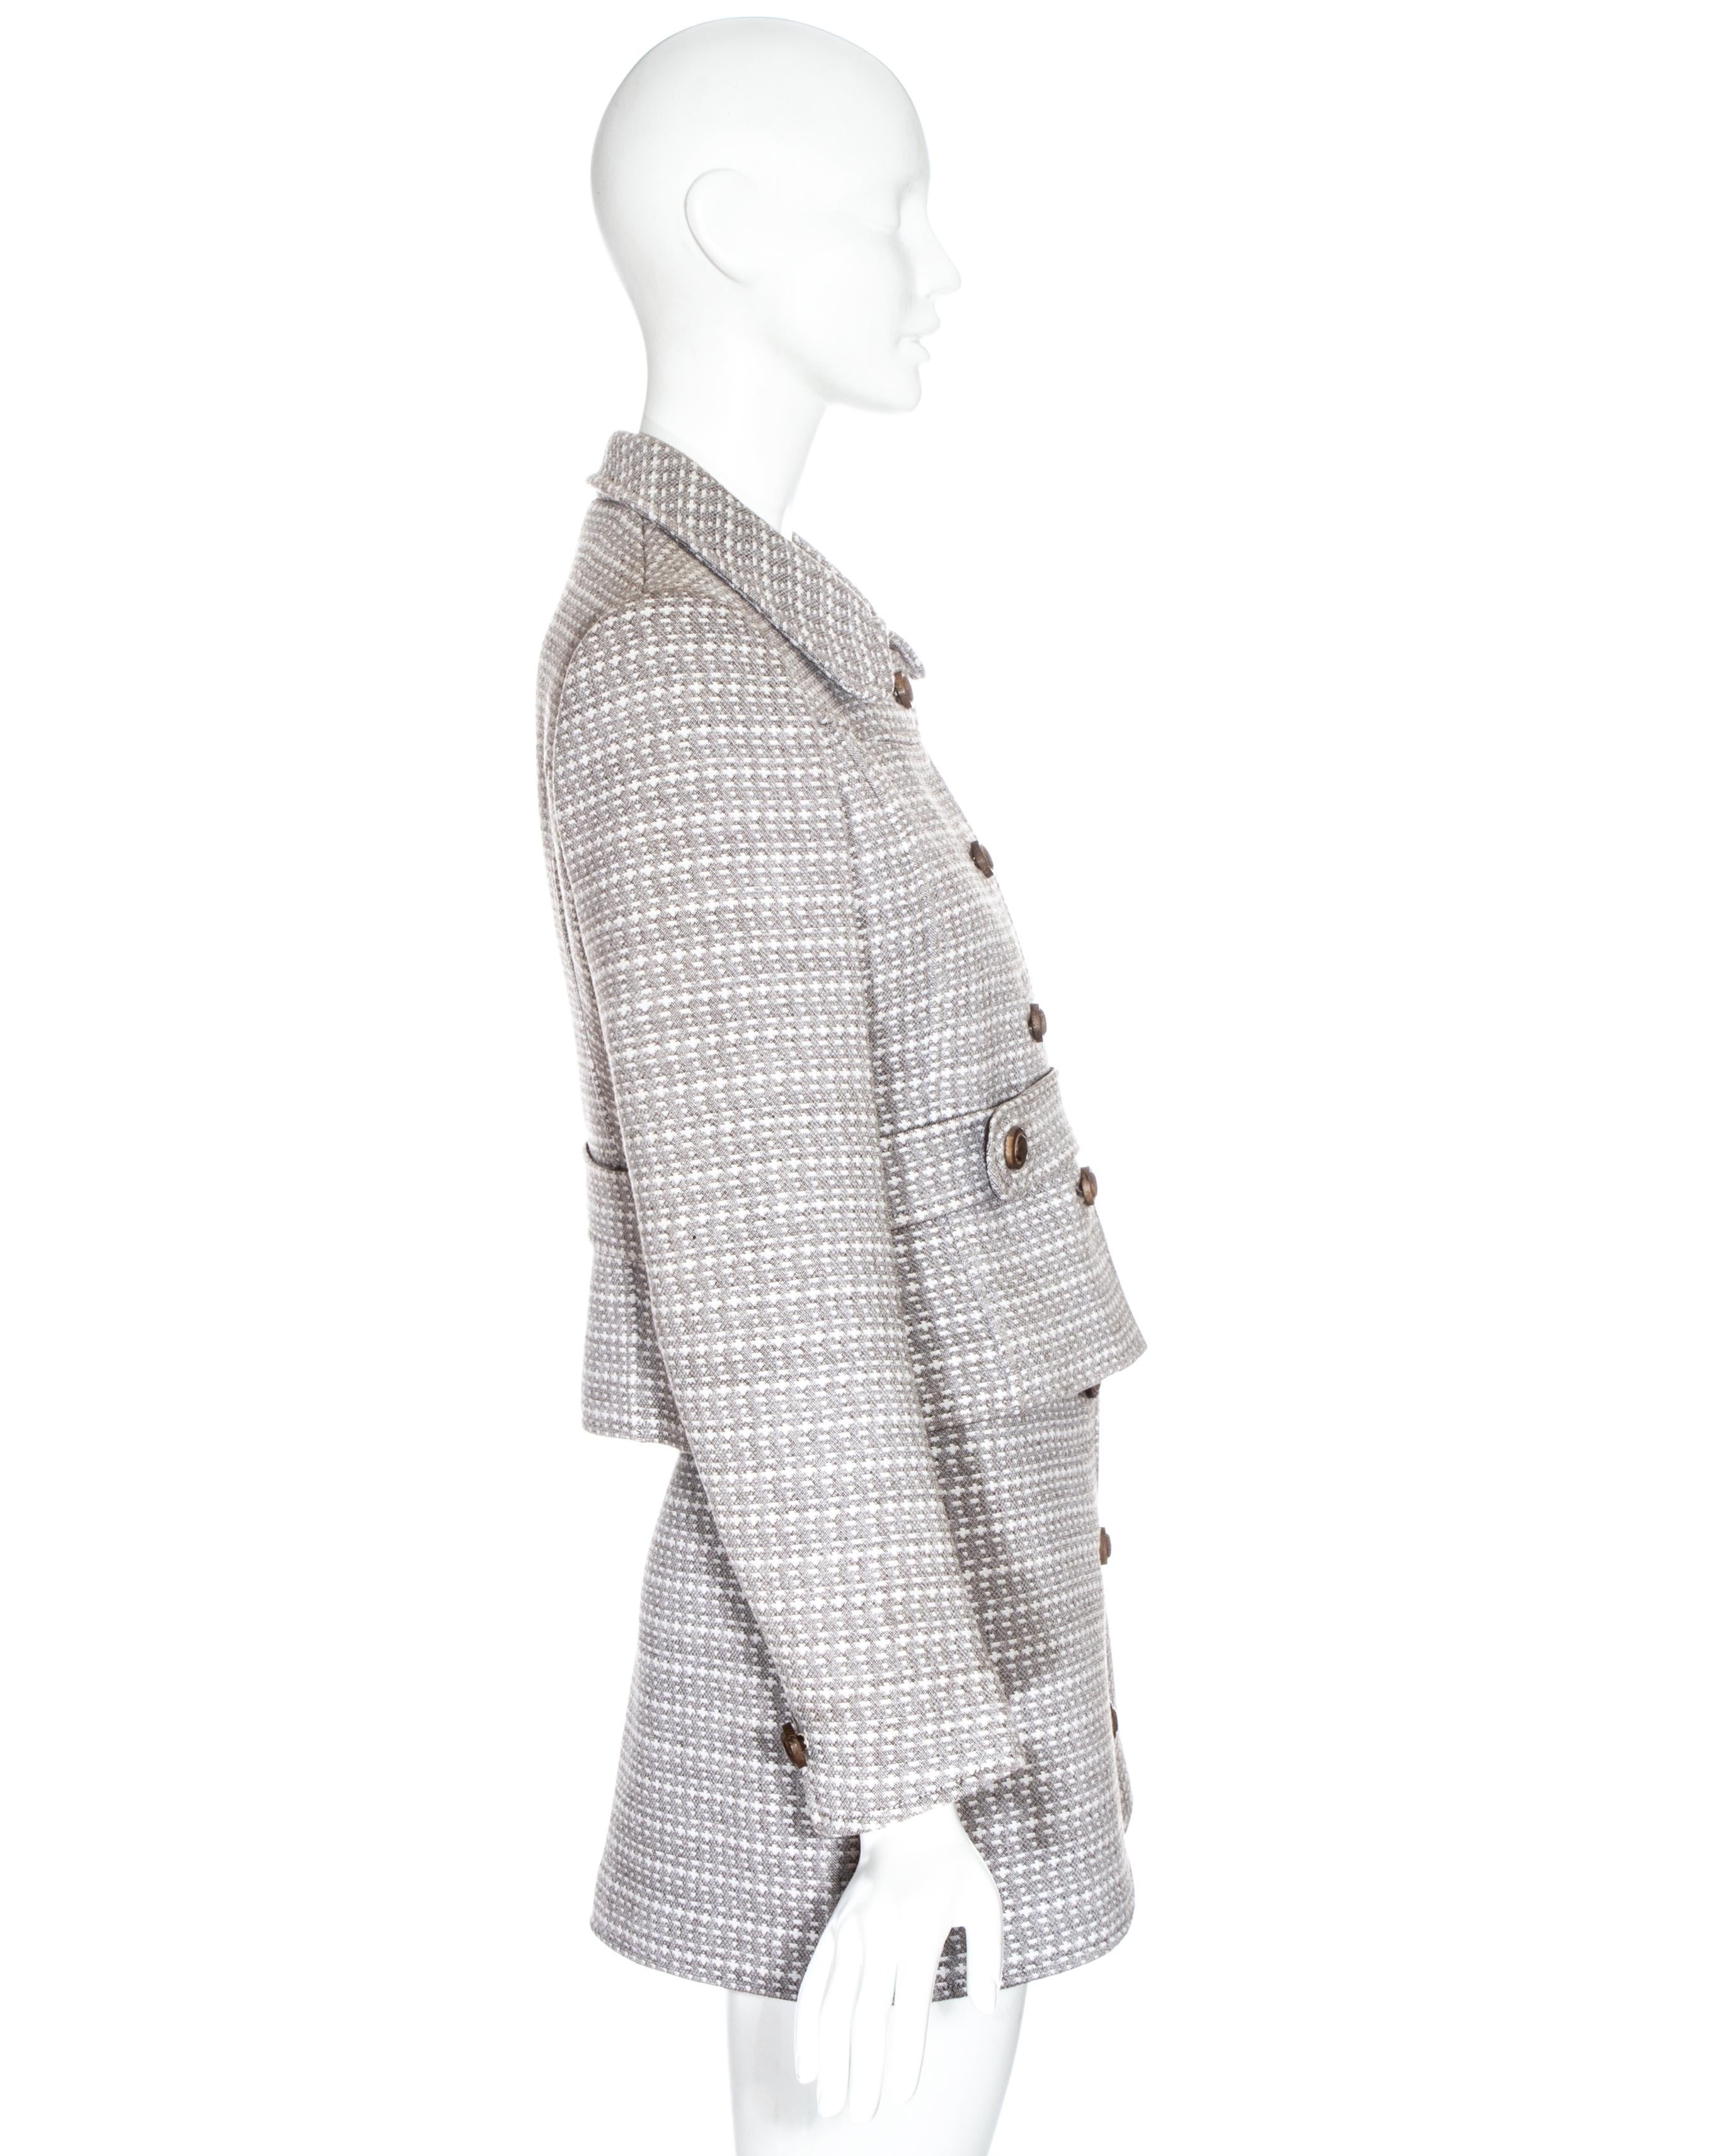 Courreges couture brown wool mini skirt suit, c. 1969 In Excellent Condition For Sale In London, GB